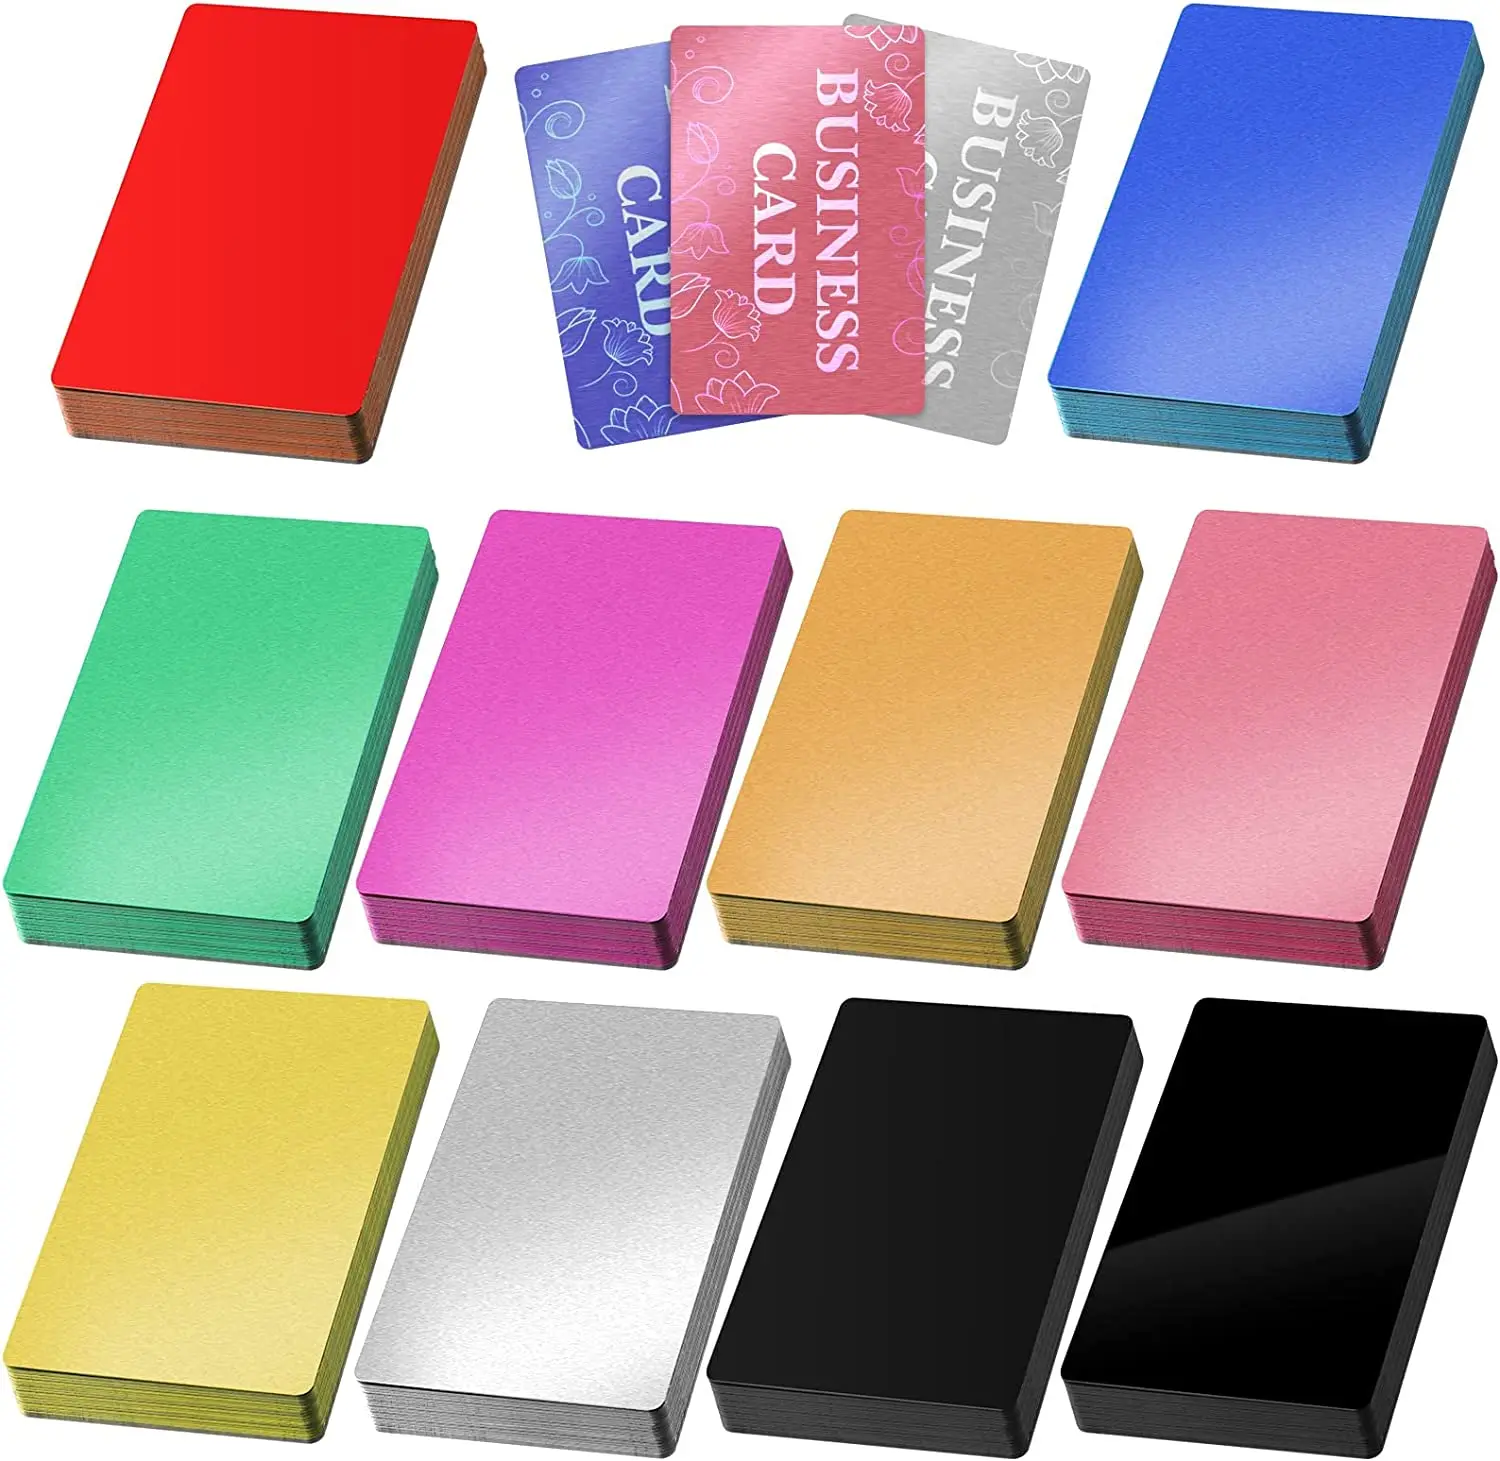 

0.45mm metal credit card blanks anodized thick aluminum business credit card laser blanks